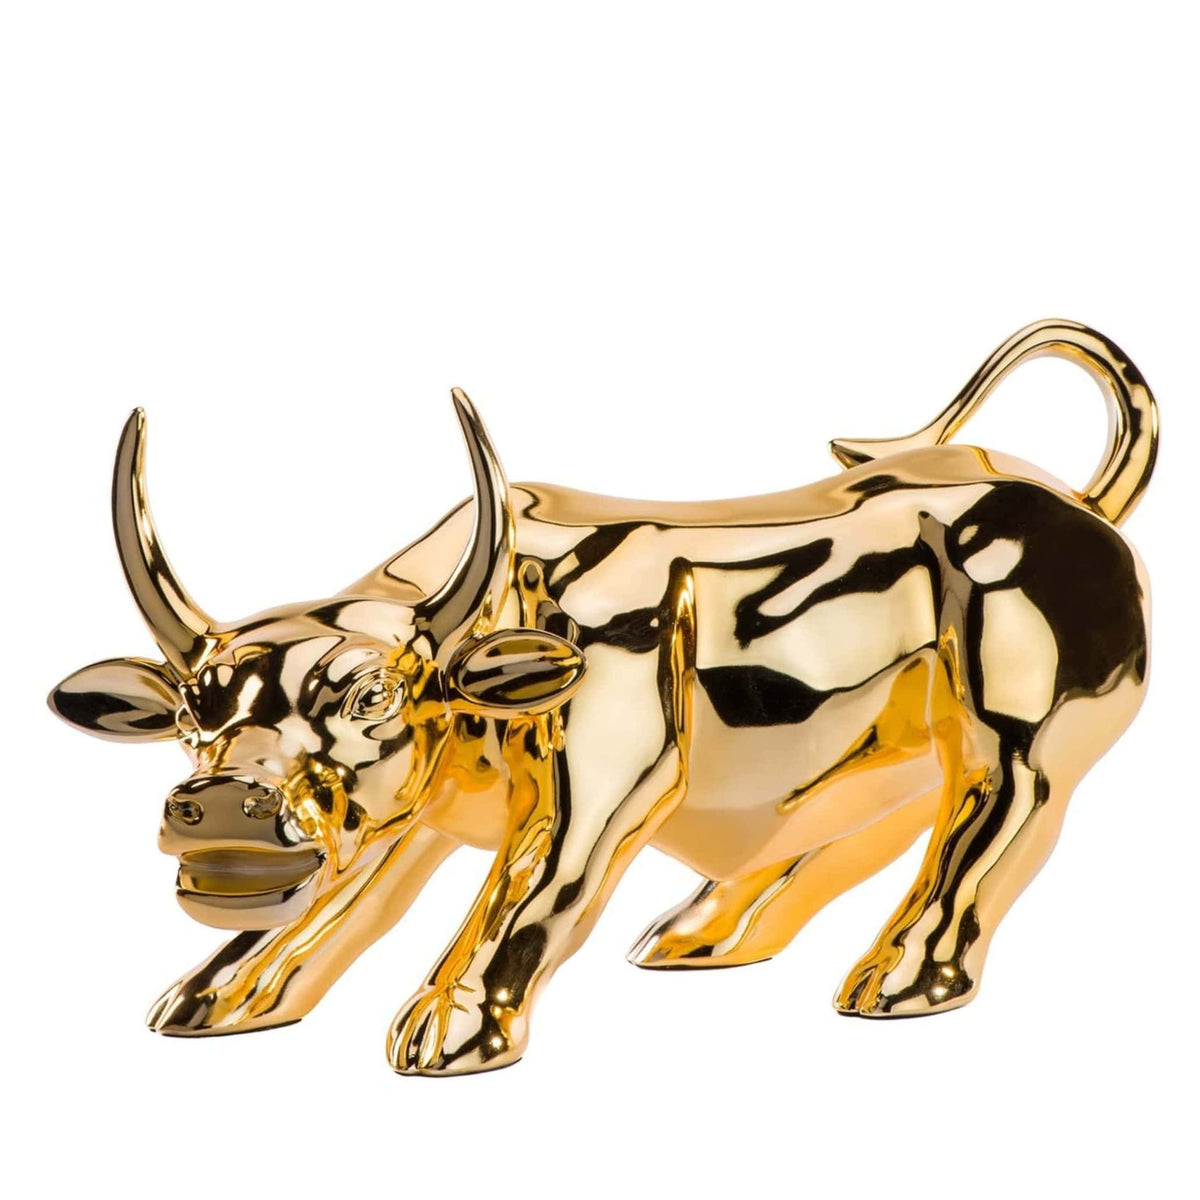 Hydro Resin Bull Sculpture in Gold